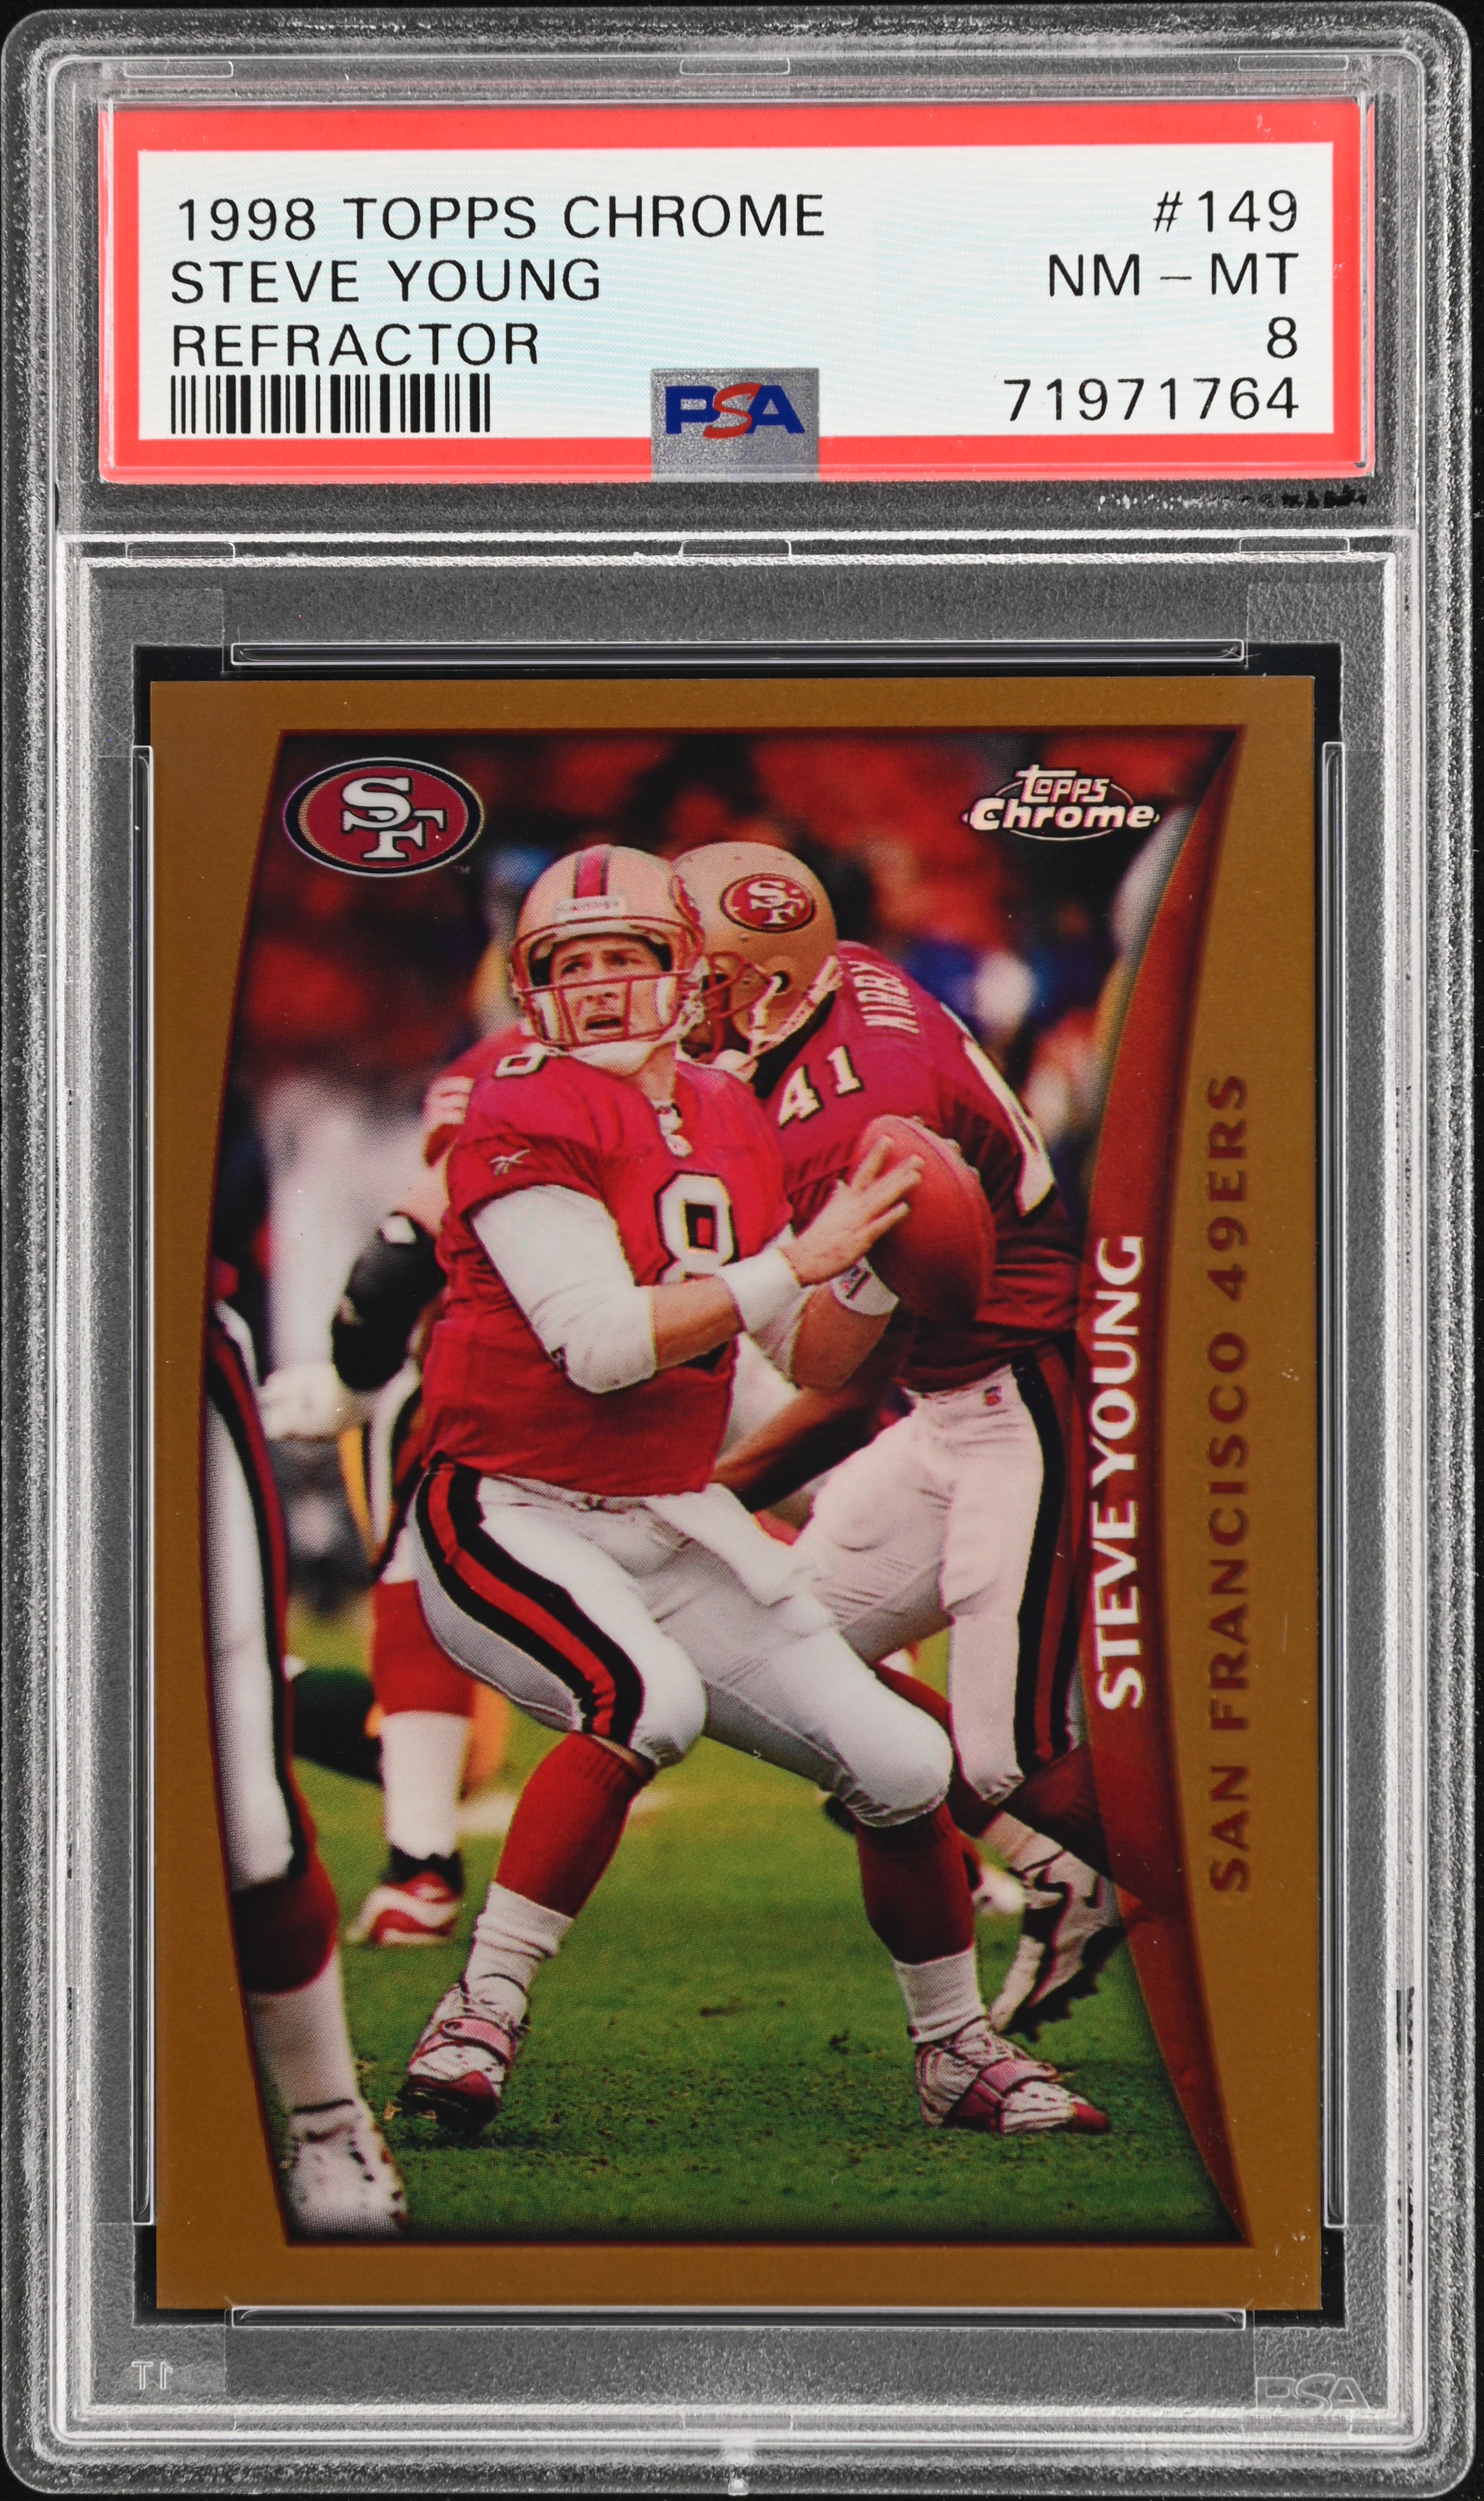 1998 Topps Chrome Refractor #149 Steve Young – PSA NM-MT 8